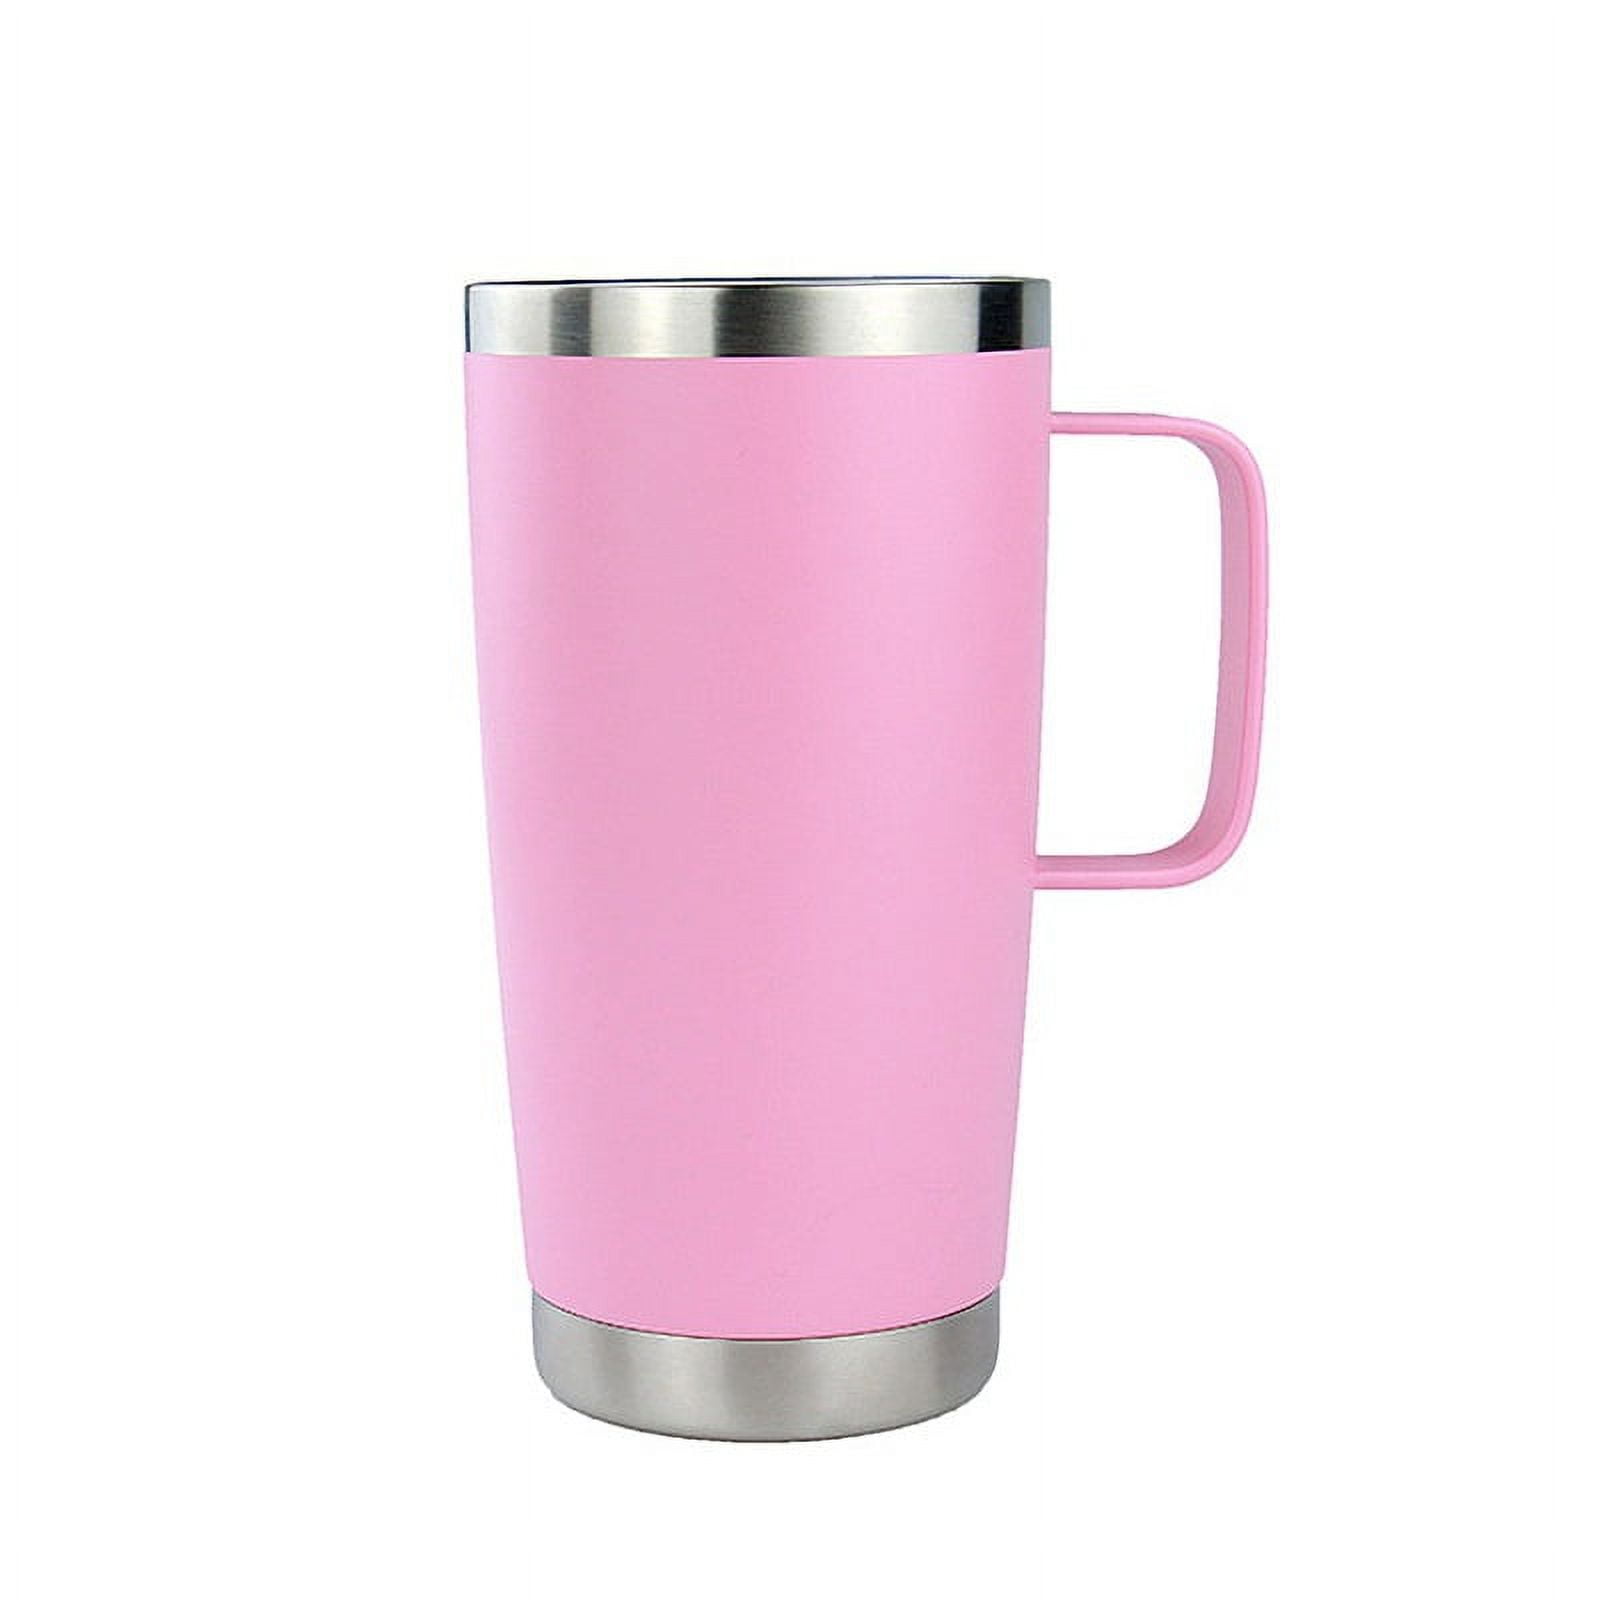  NPW Good Vibes Mercury In Retrograde Retro Mug (BPA-Free)  Double Walled Hospital Mug with Straw - Perfect Pink Party Mug with Large  Carry Handle, Flex Straw Included (22 Fl Oz) 